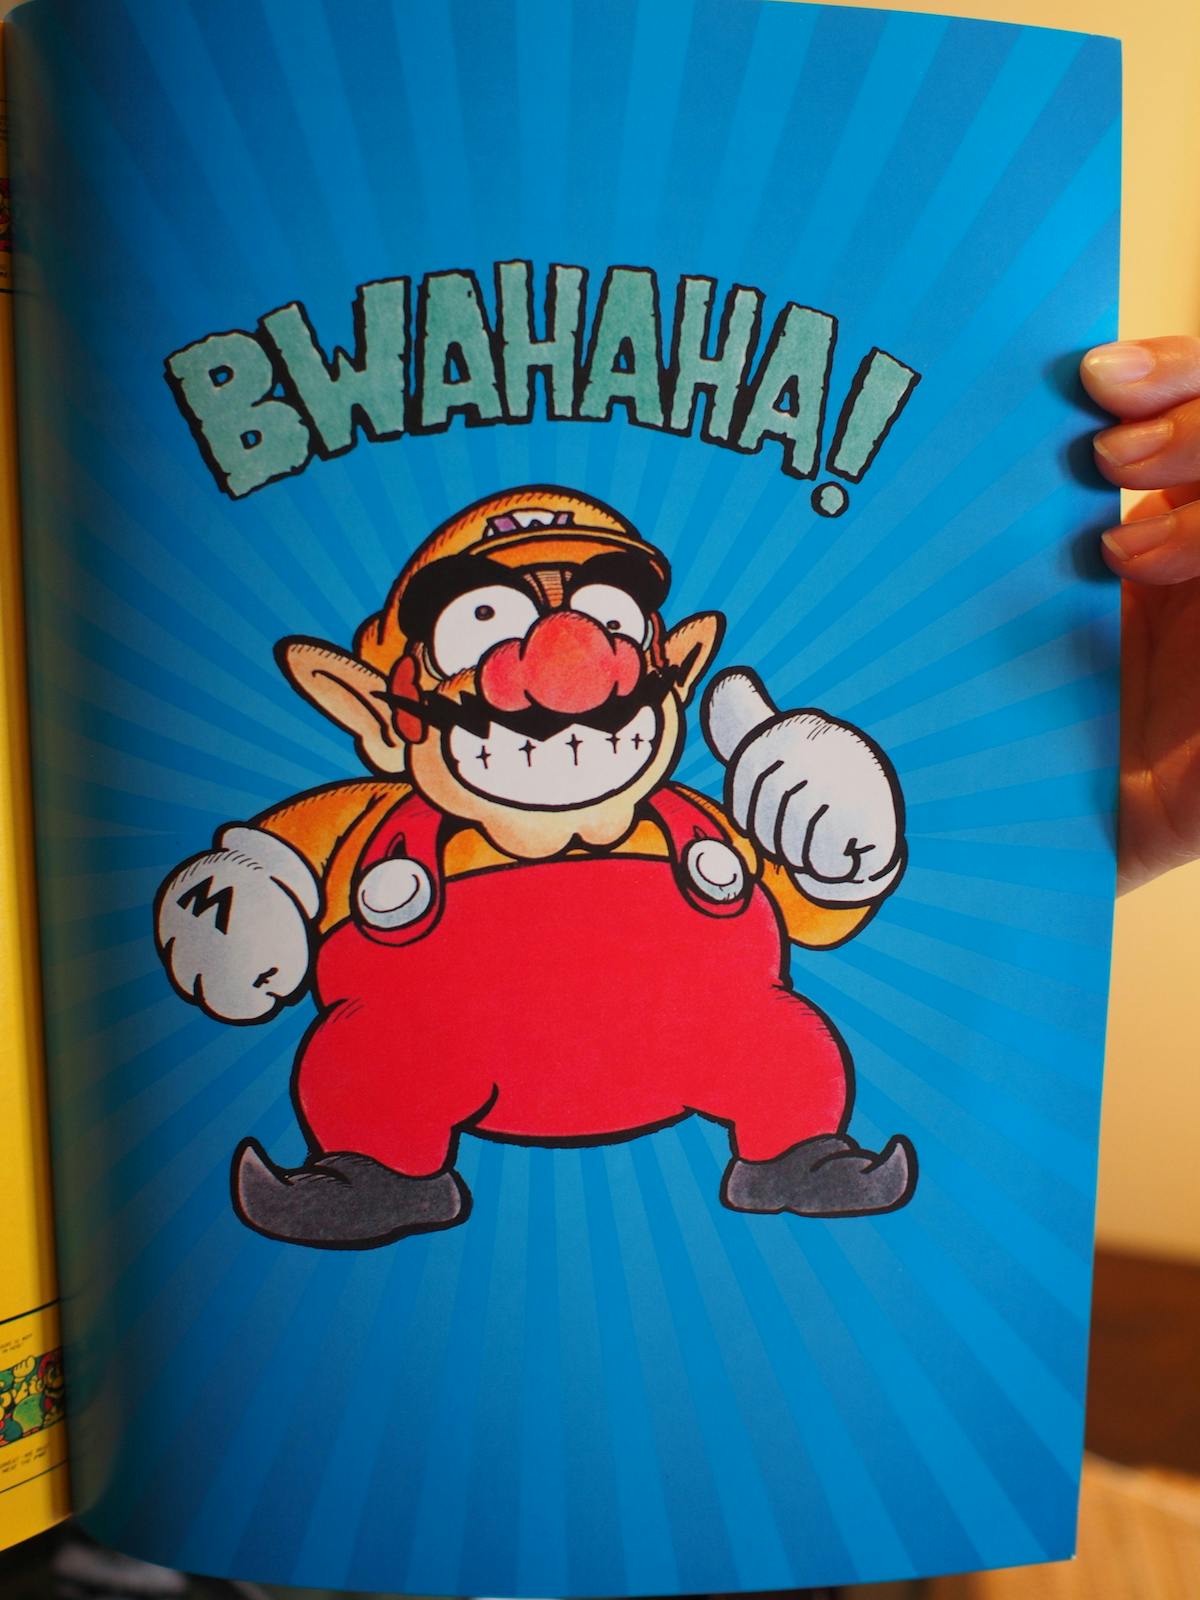 The "W" in Wario must stand for "weird."